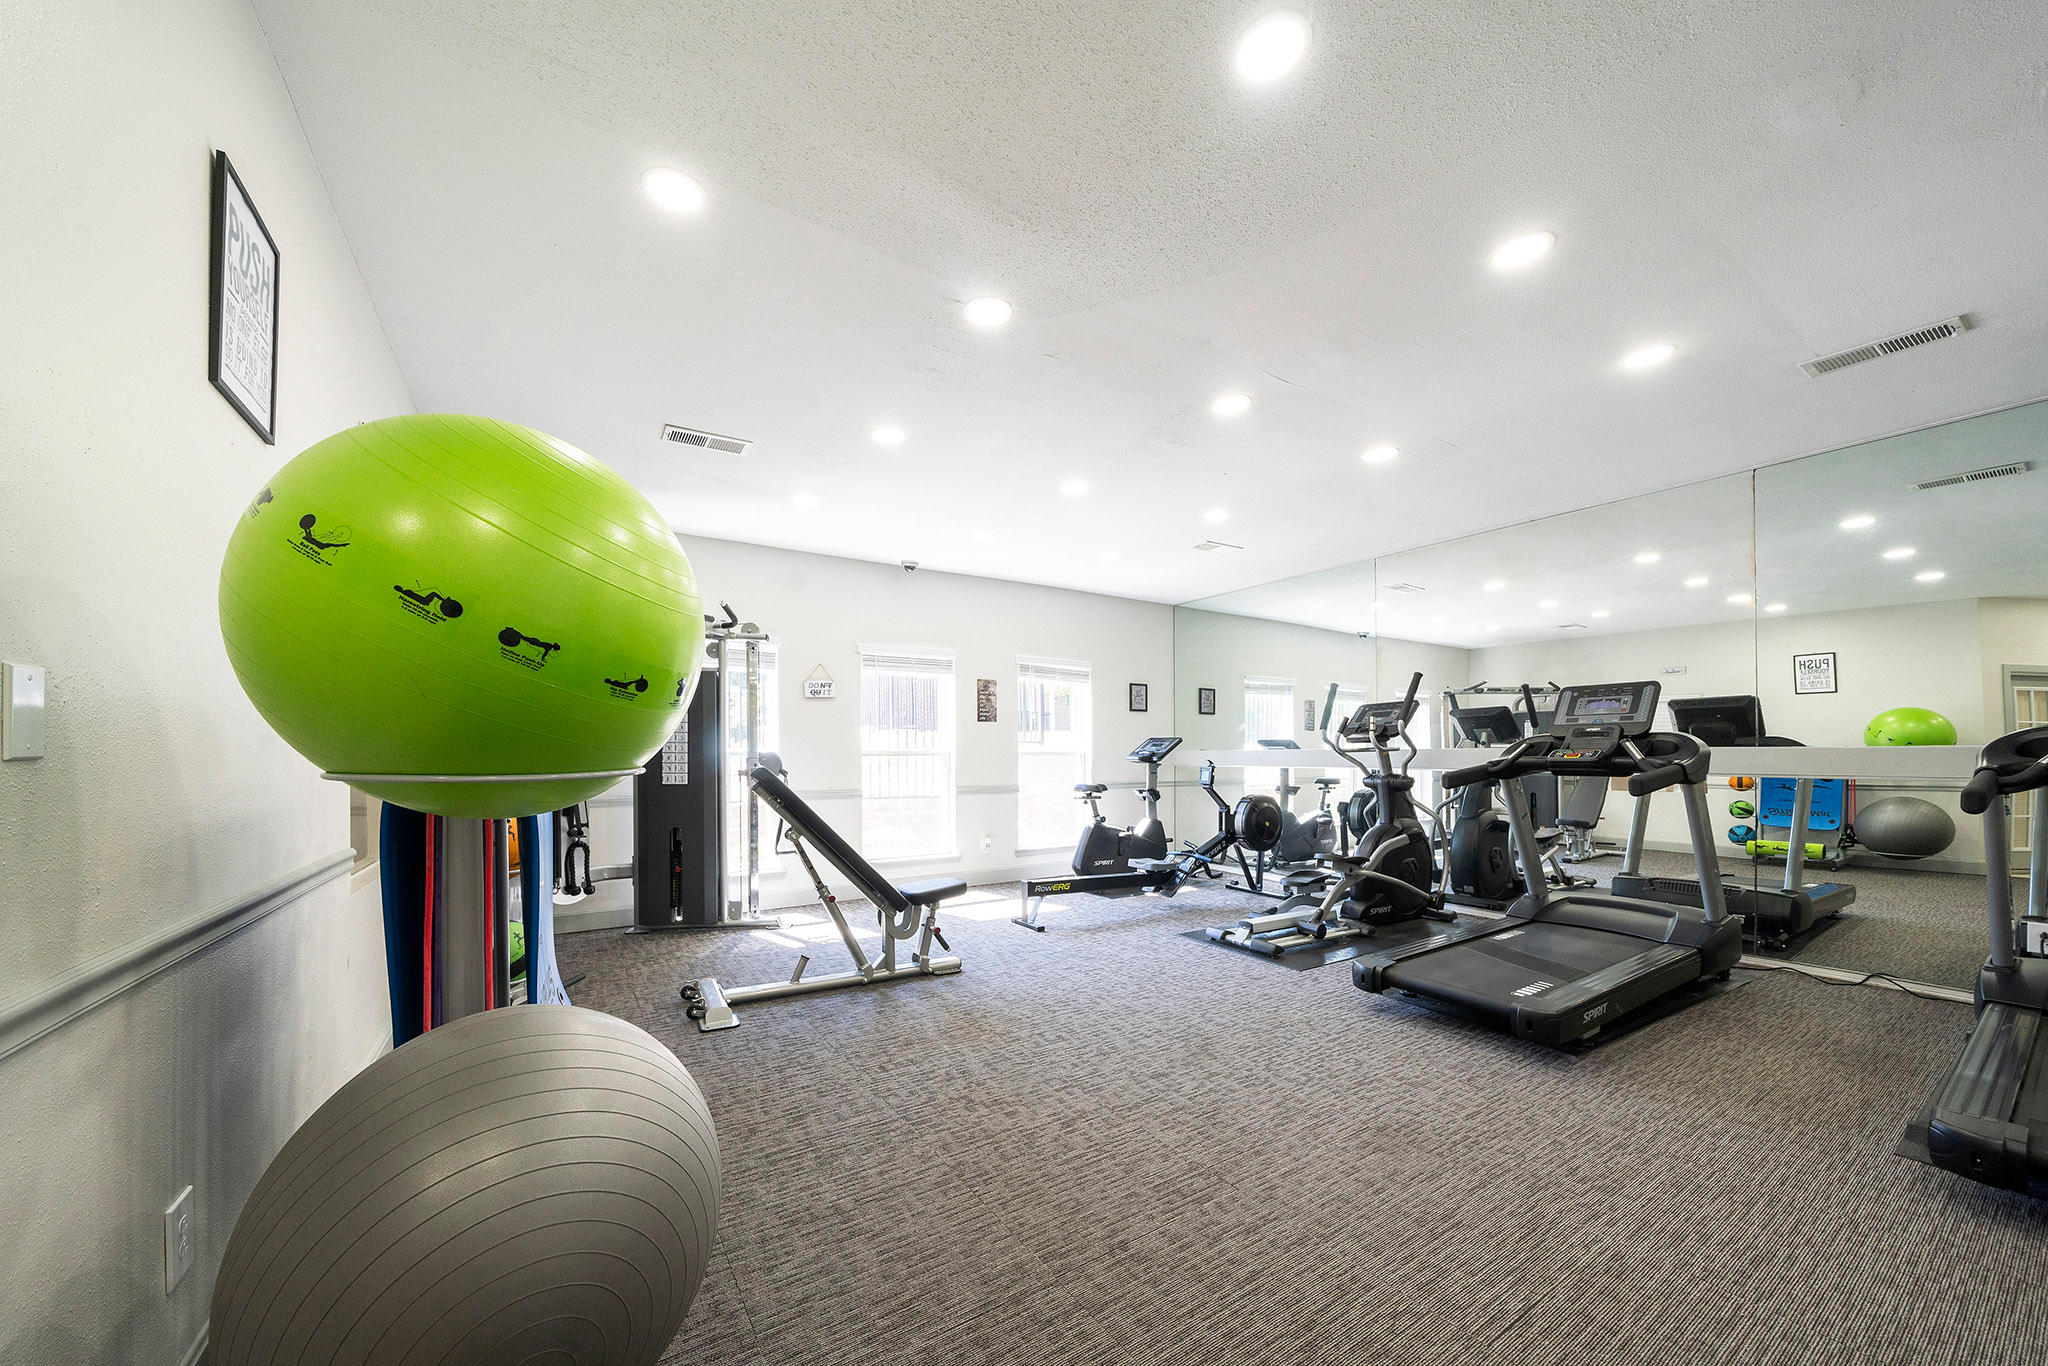 Break a sweat in our fitness center.